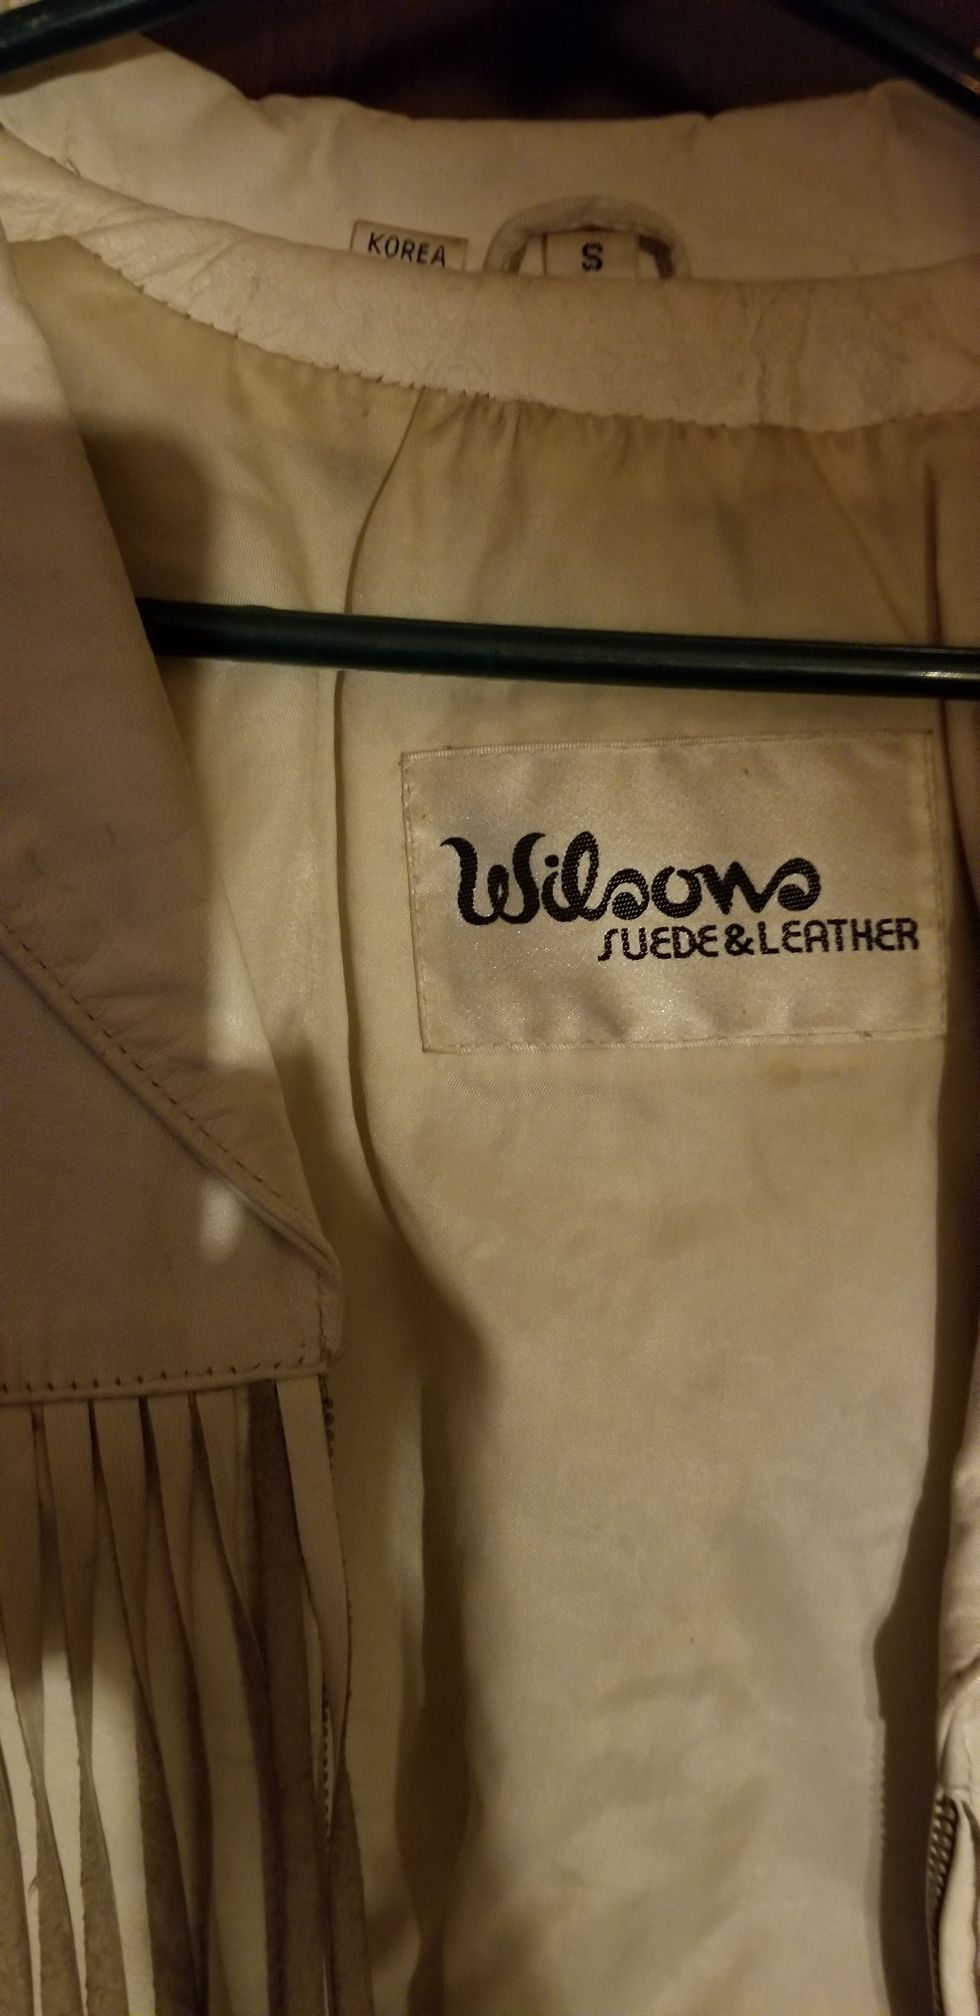 Wilson's White Leather Jacket Vintage size Small